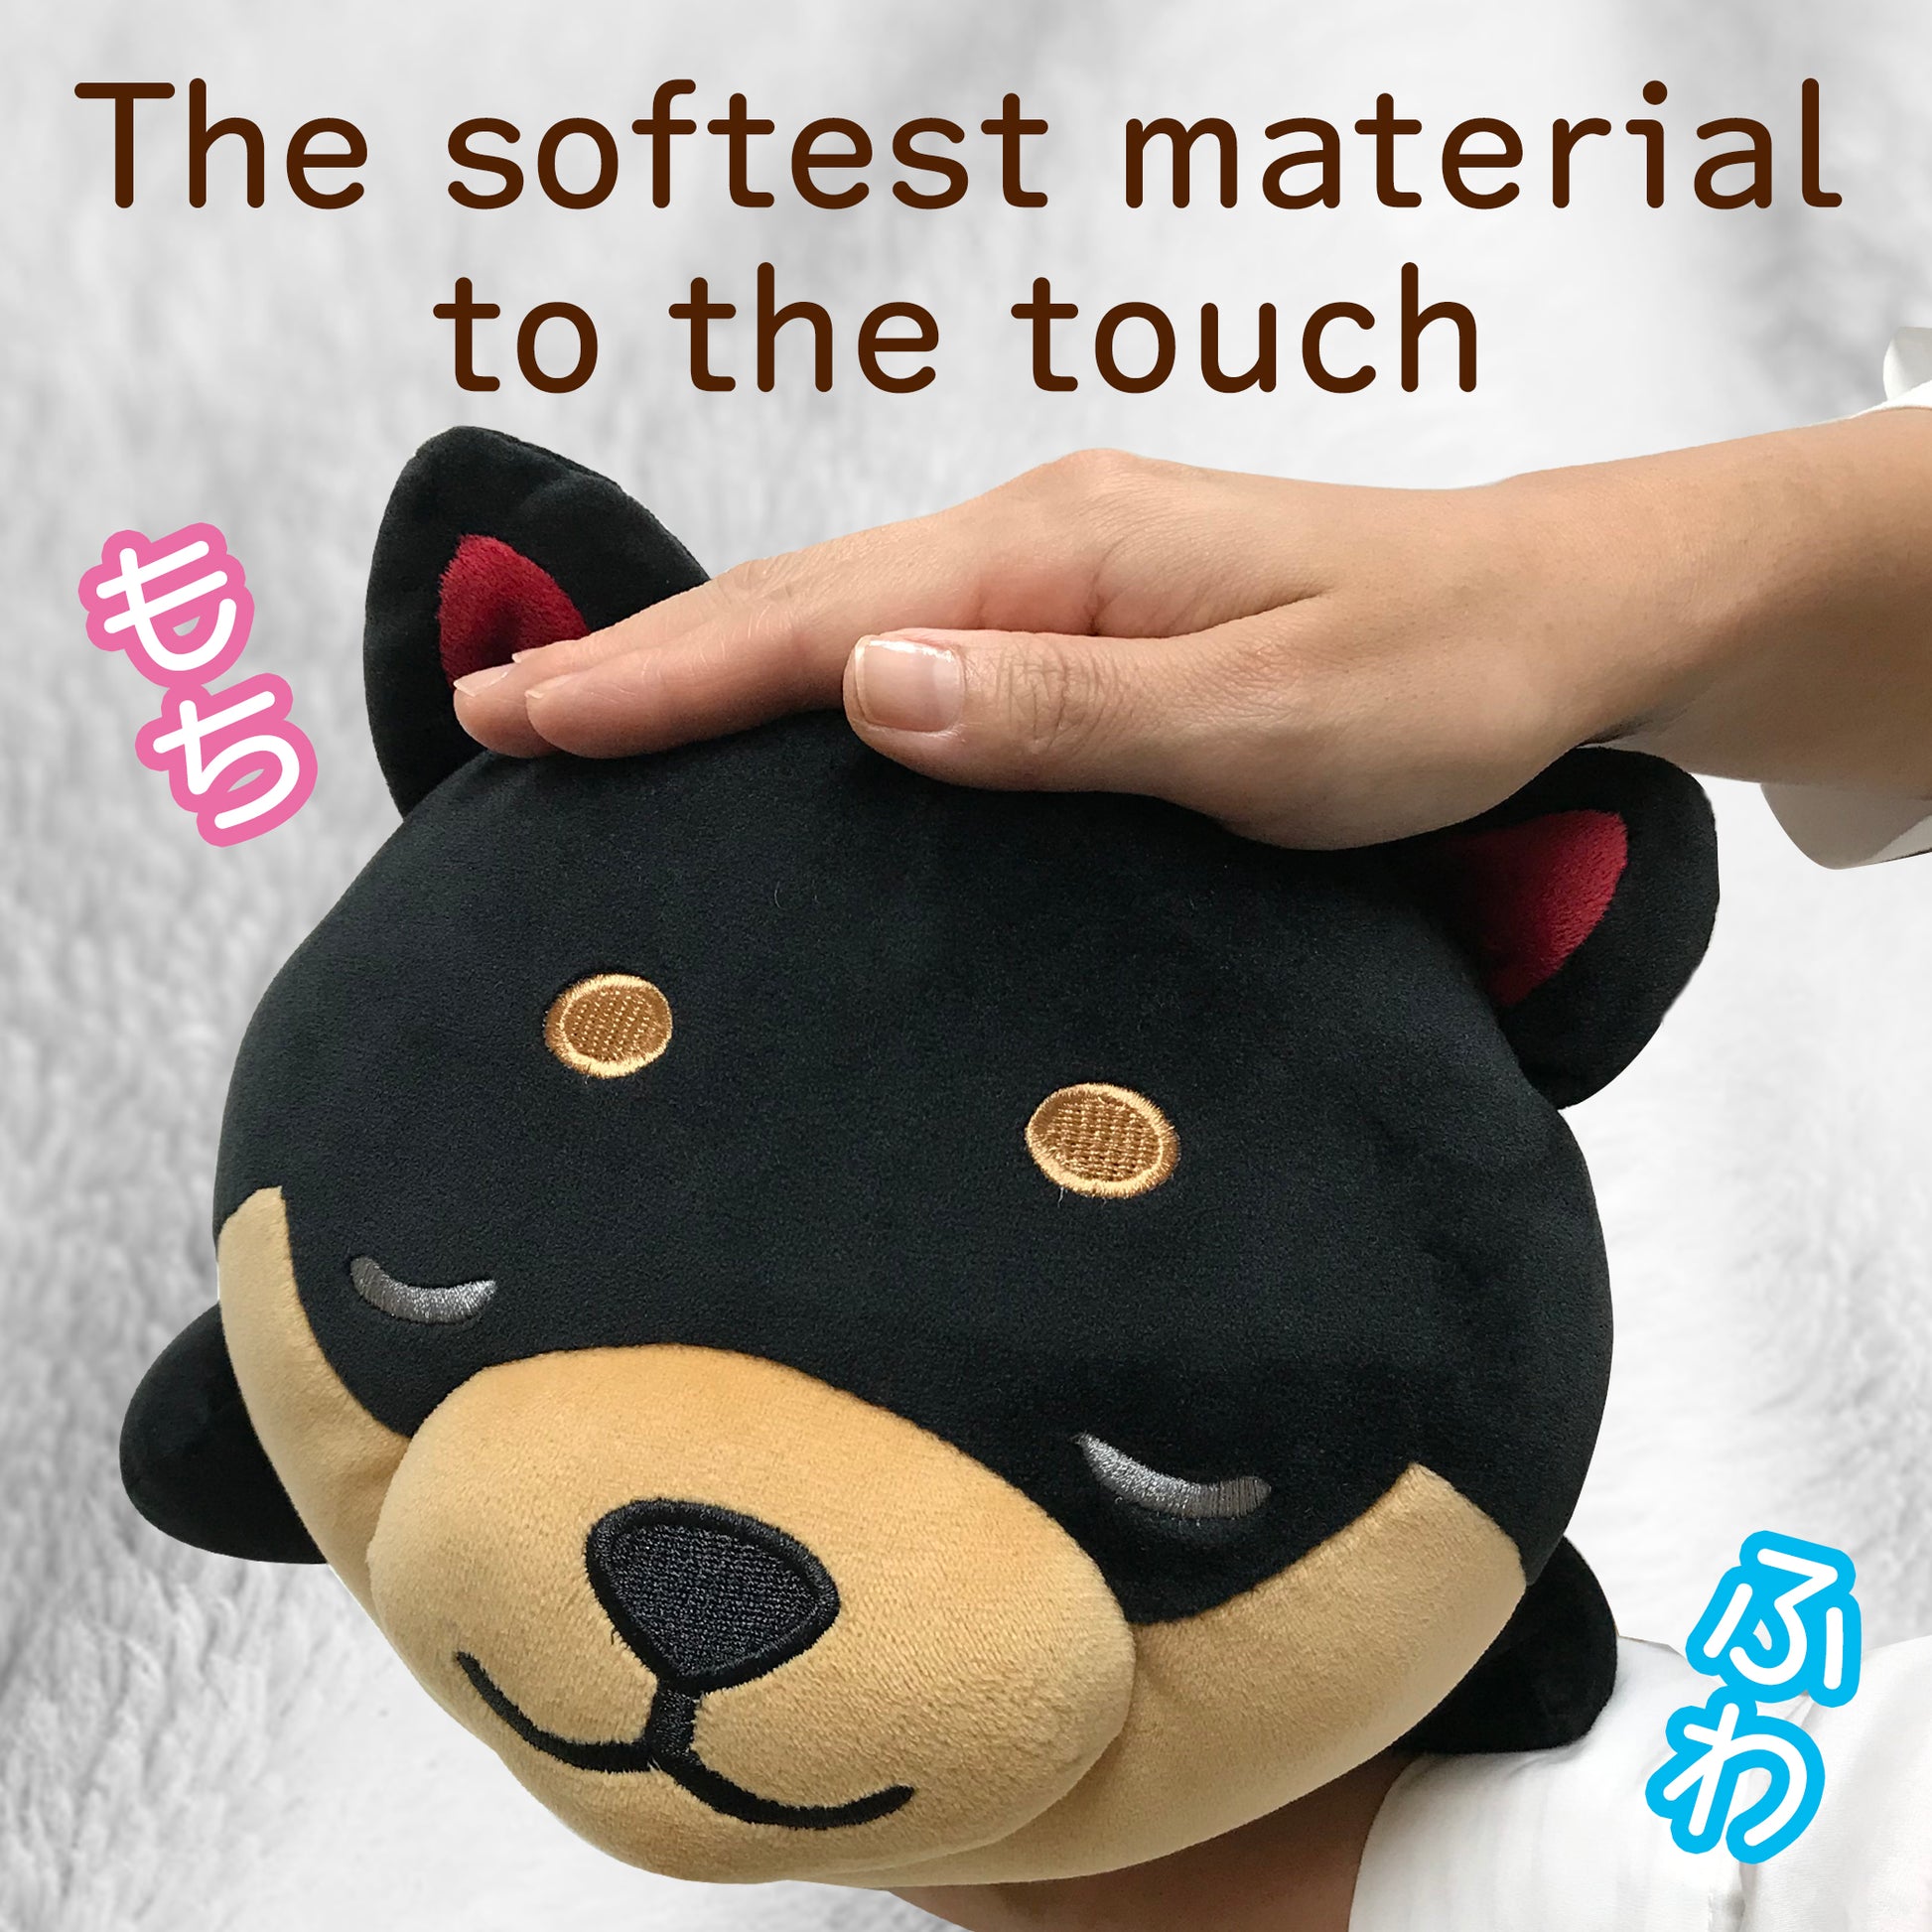 Stuffed dog Mameshiba black pillow is the softest material to the touch.